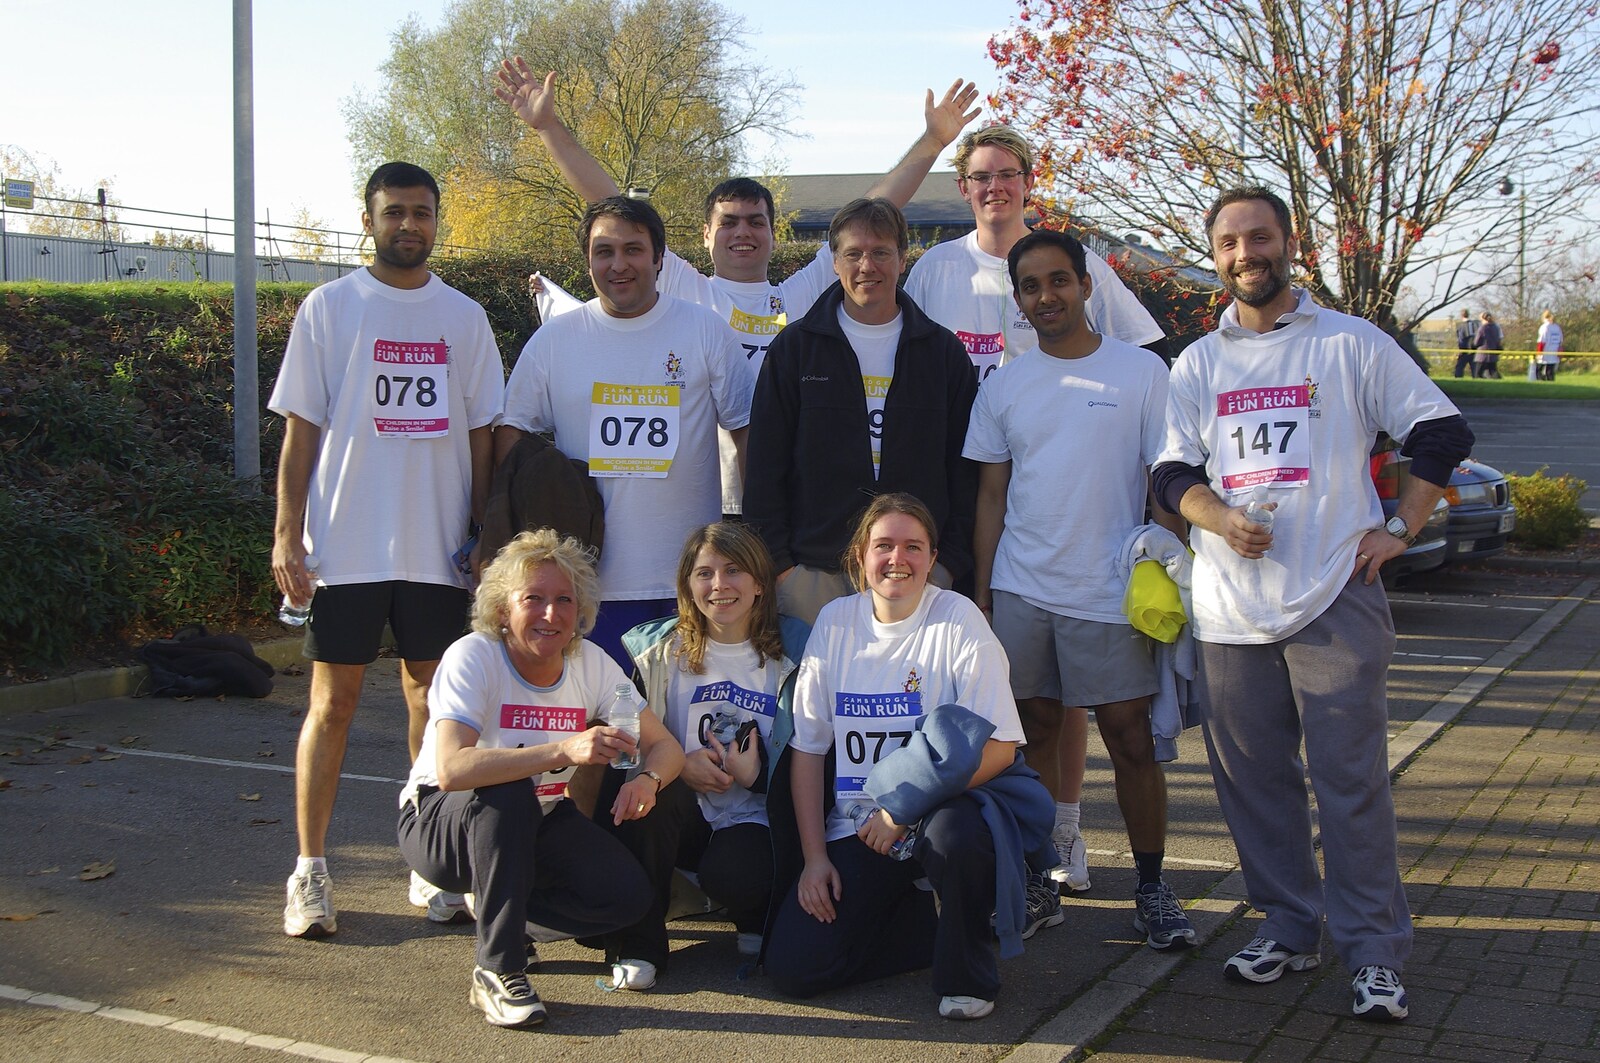 The Qualcomm team from Isobel and the Science Park Fun Run, Milton Road, Cambridge - 16th November 2007